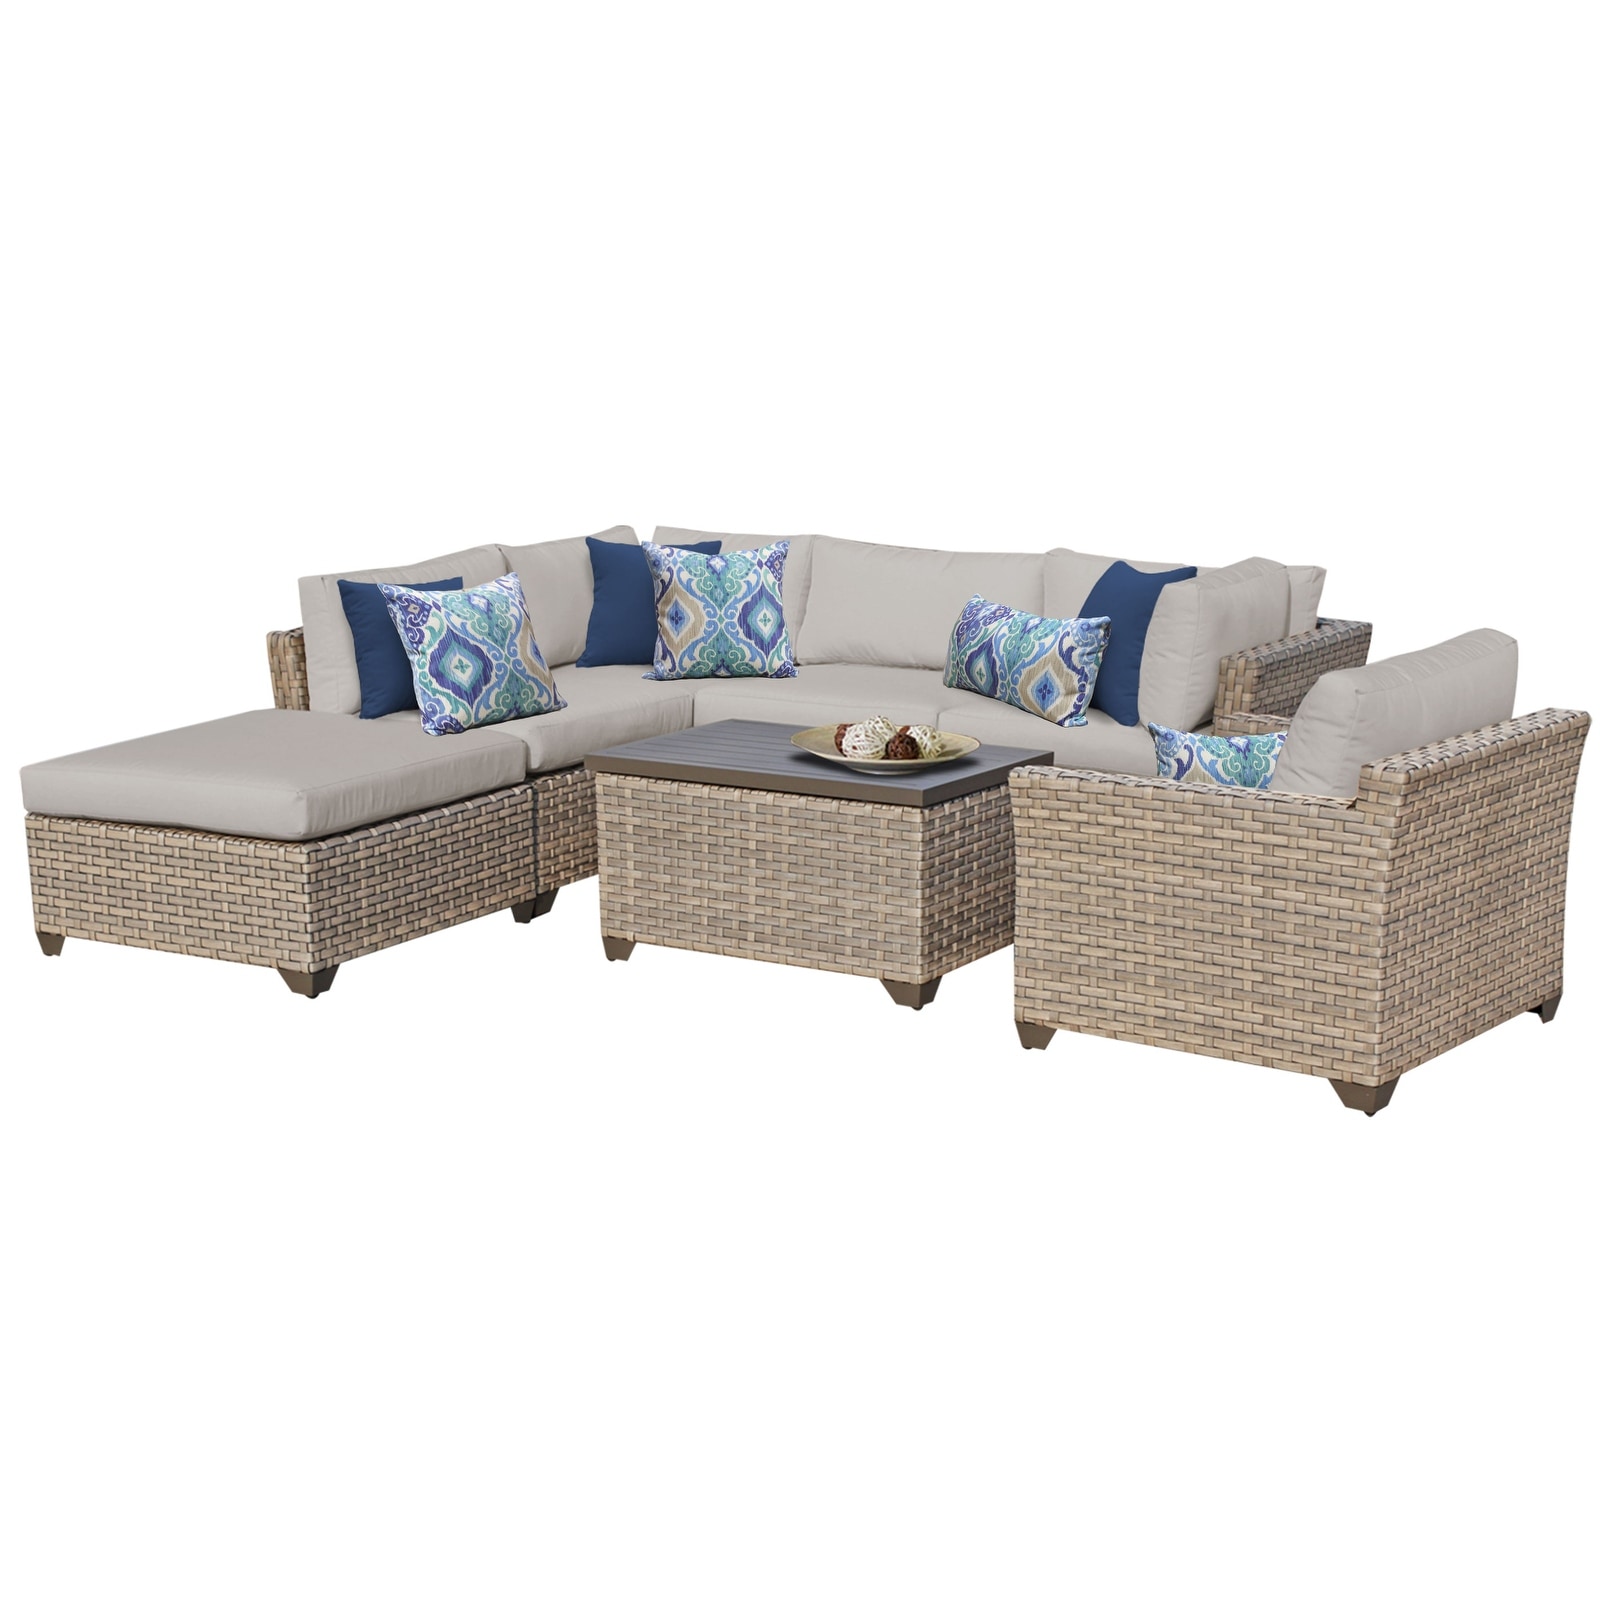 Monterey 7 Piece Wicker Outdoor Sectional Seating Group With Storage Coffee Table And Club Chair